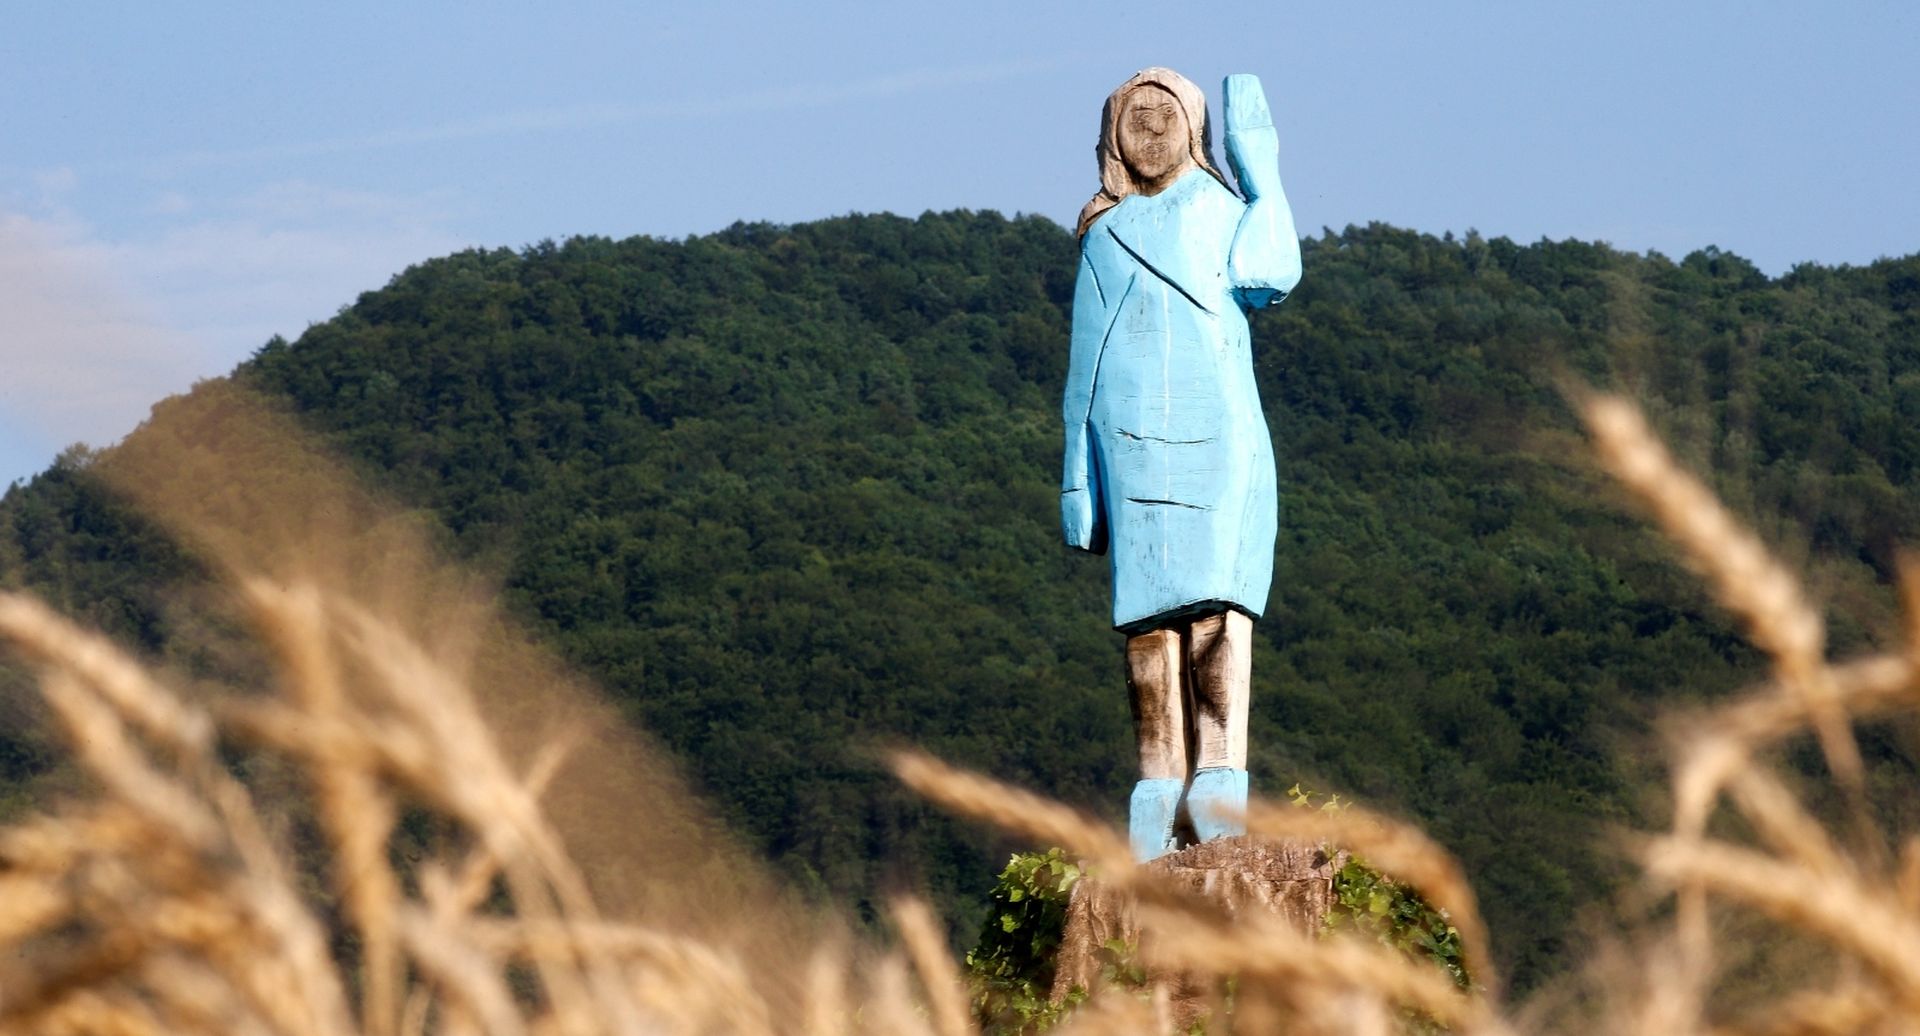 Life-size wooden sculpture of U.S. first lady Melania Trump is officially unveiled in Rozno, near her hometown of Sevnica Life-size wooden sculpture of U.S. first lady Melania Trump is officially unveiled in Rozno, near her hometown of Sevnica, Slovenia, July 5, 2019. REUTERS/Borut Zivulovic     TPX IMAGES OF THE DAY BORUT ZIVULOVIC